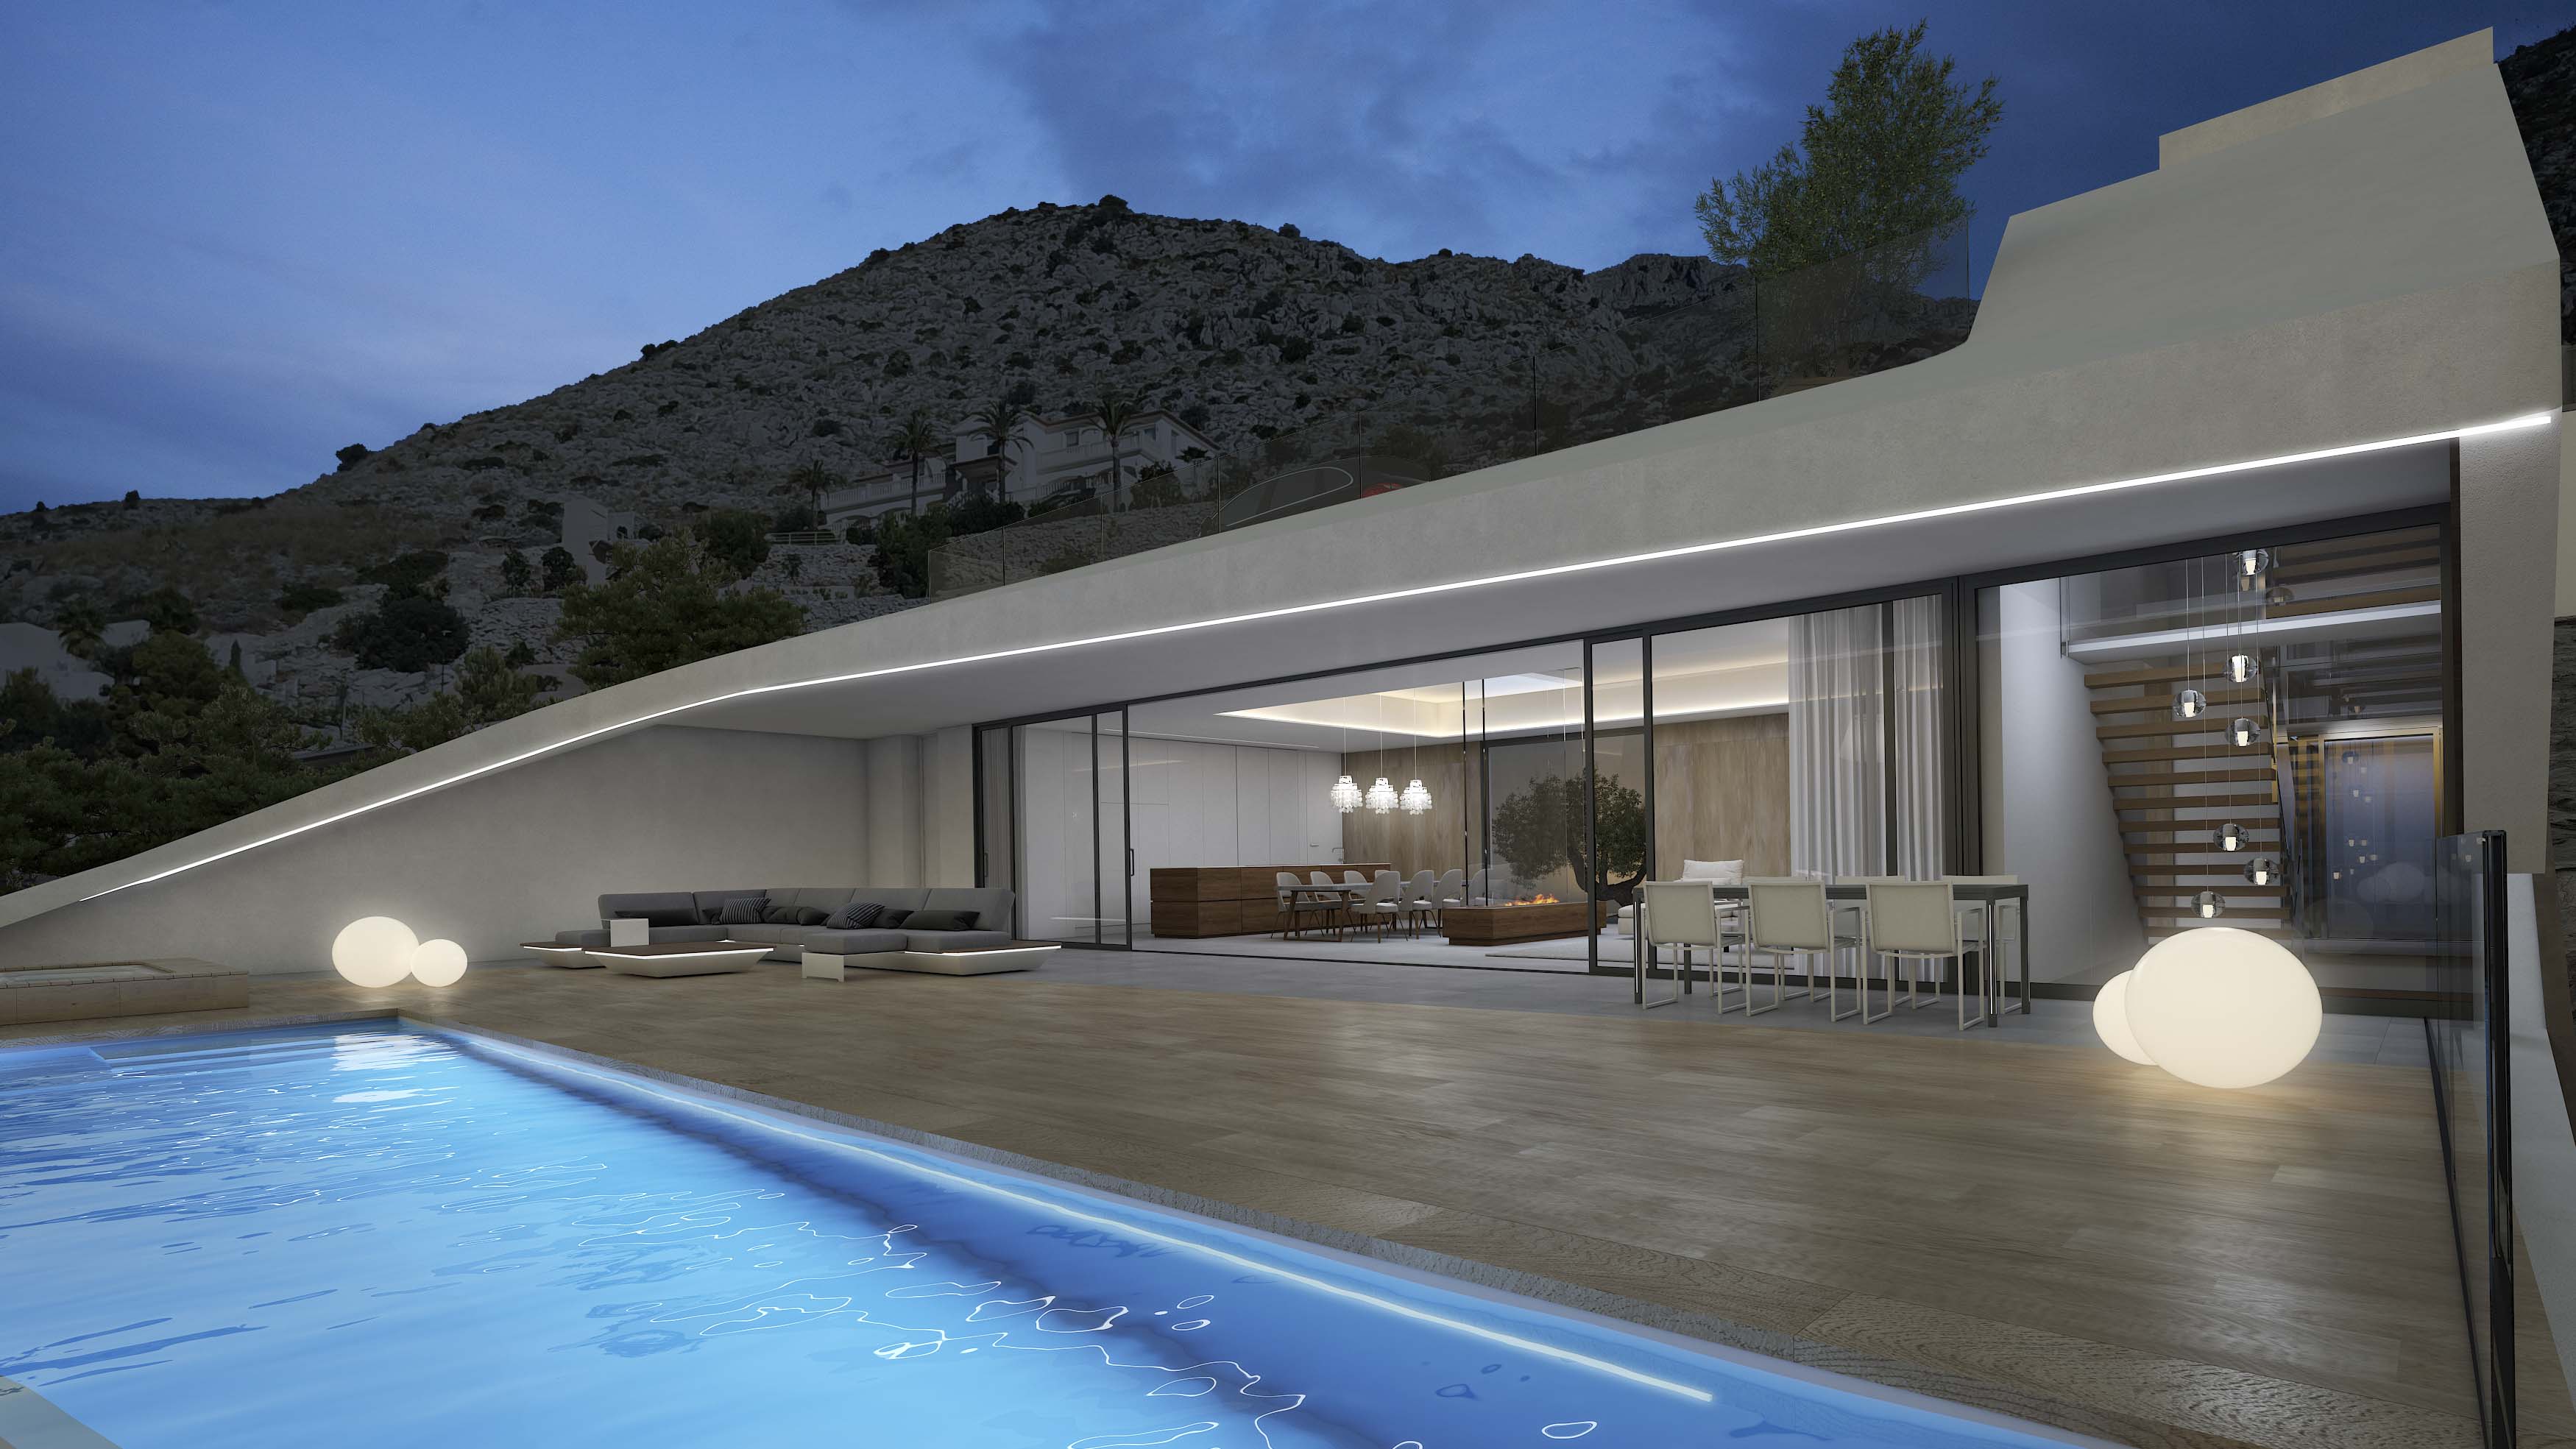 LUXURY VILLA WITH PANORAMIC VIEWS IN ALTEA